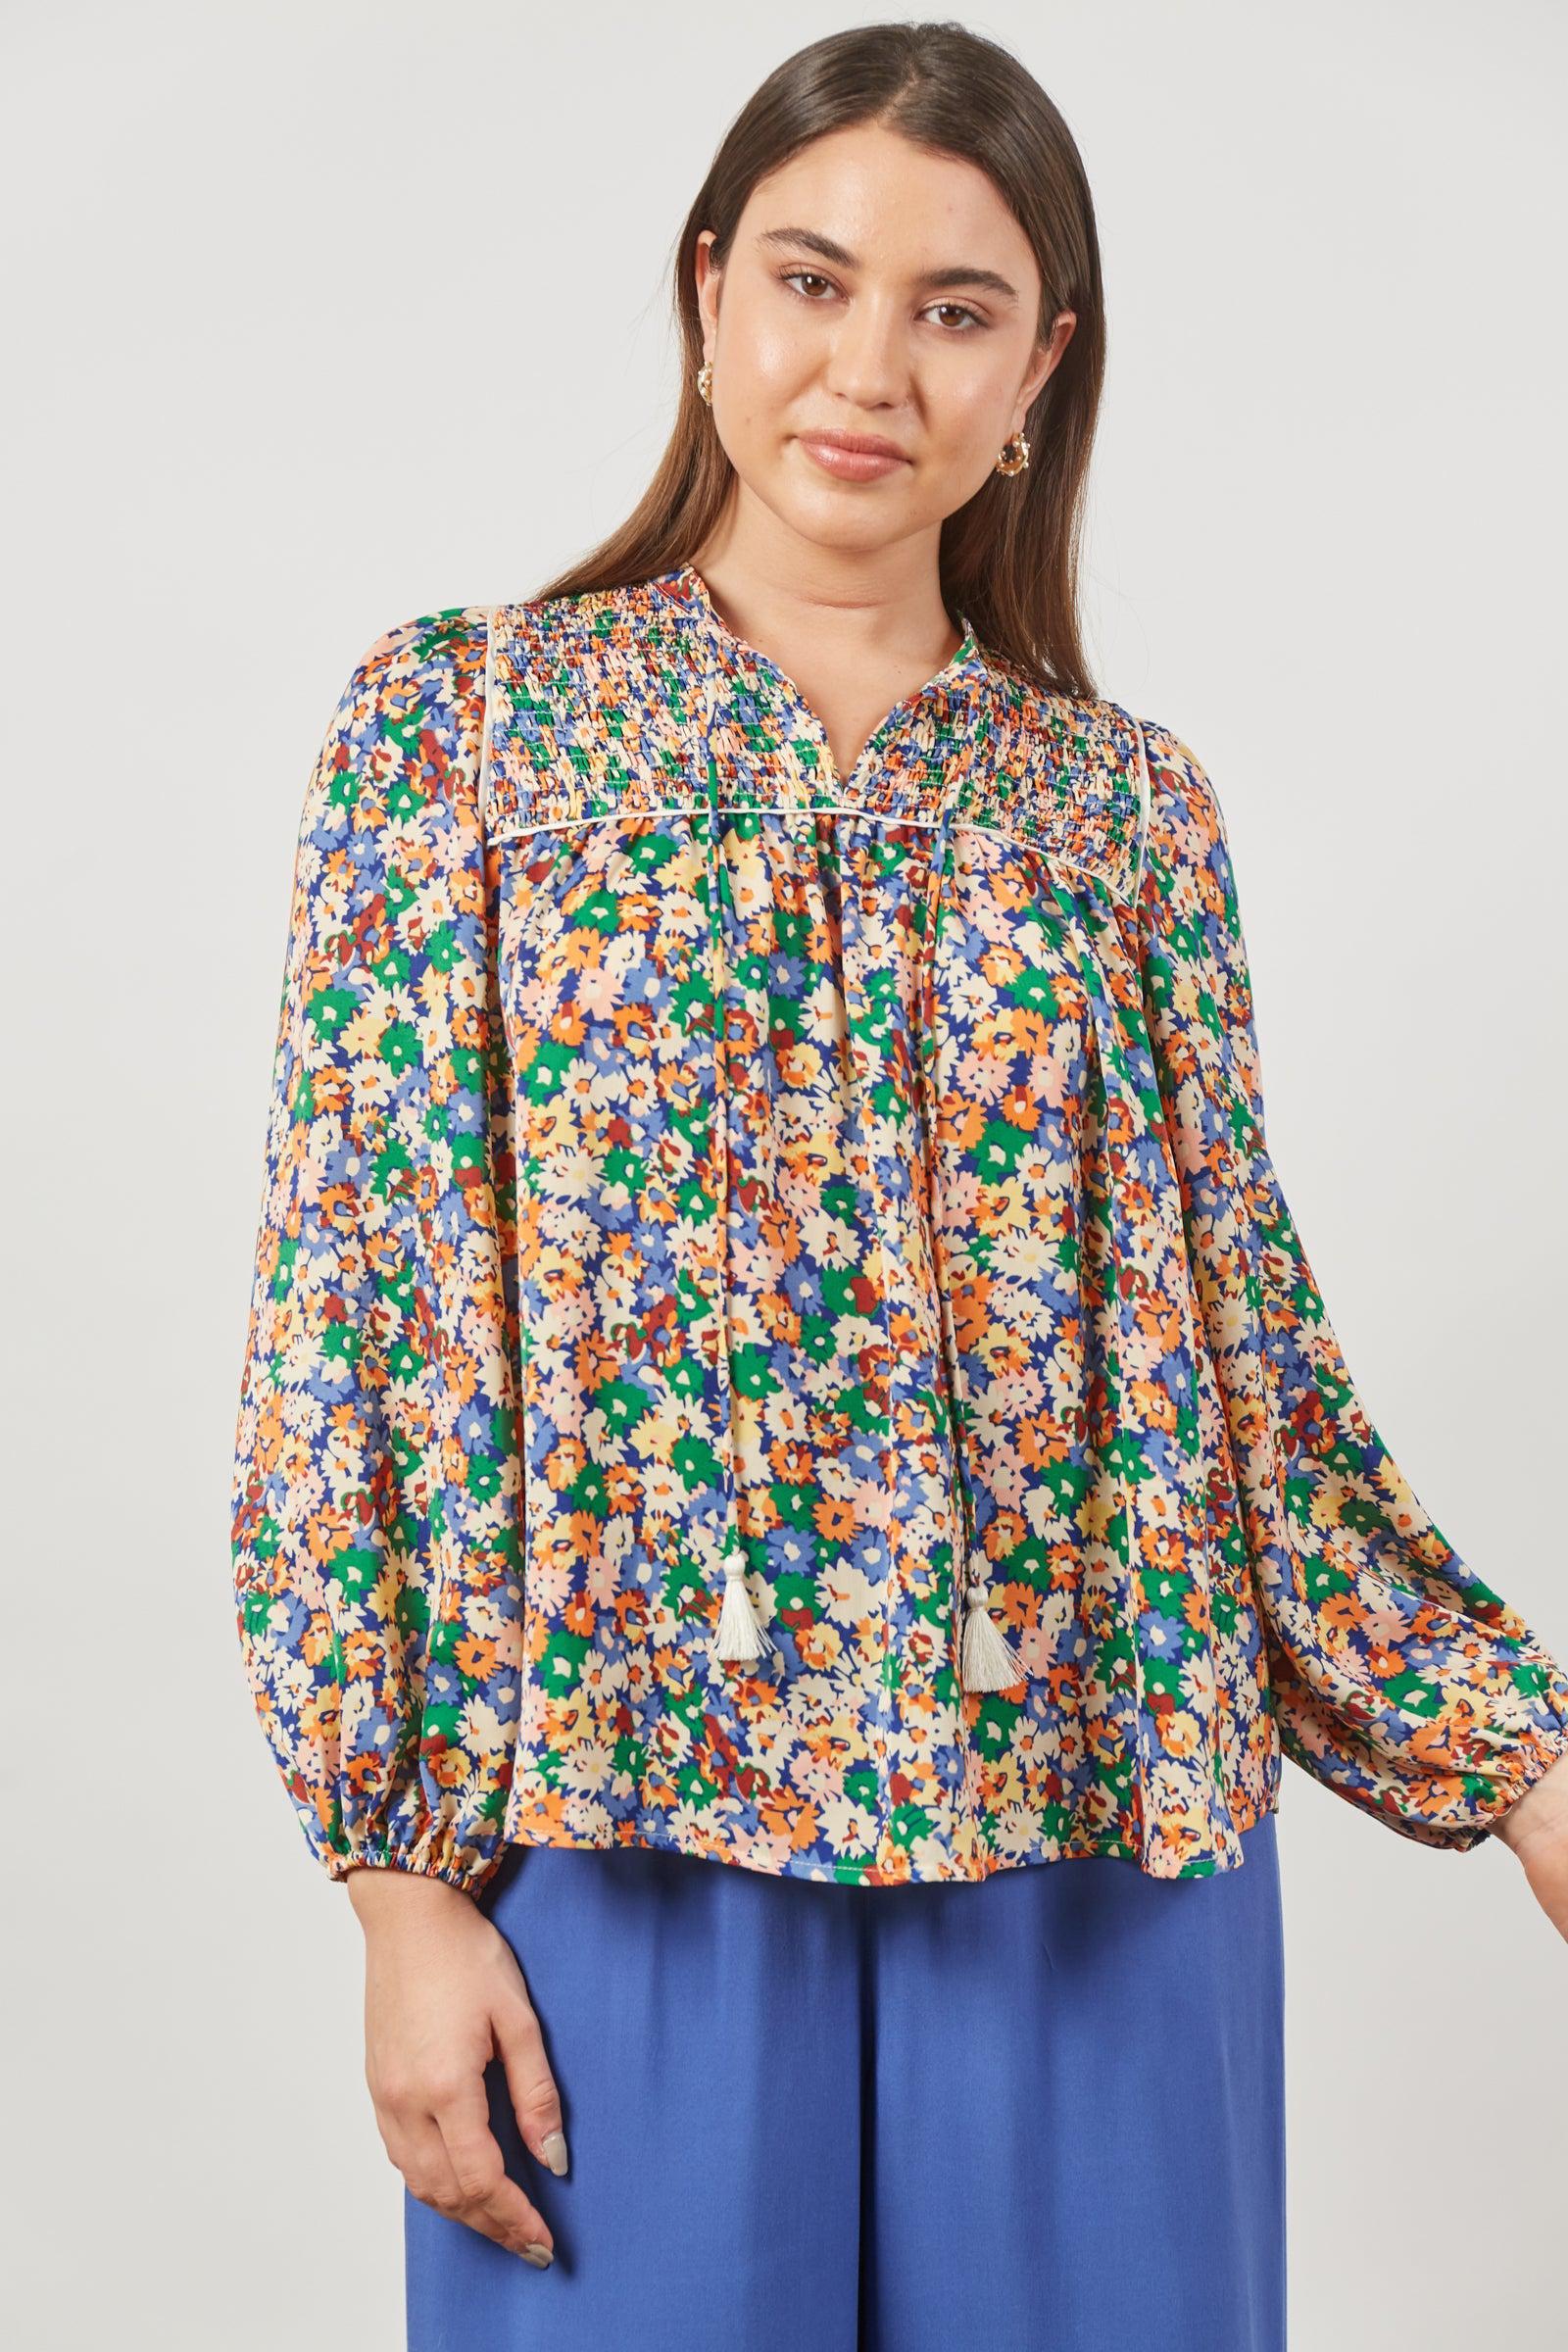 Romance Blouse - Meadow Bloom-Tops-Isle Of Mine-The Bay Room